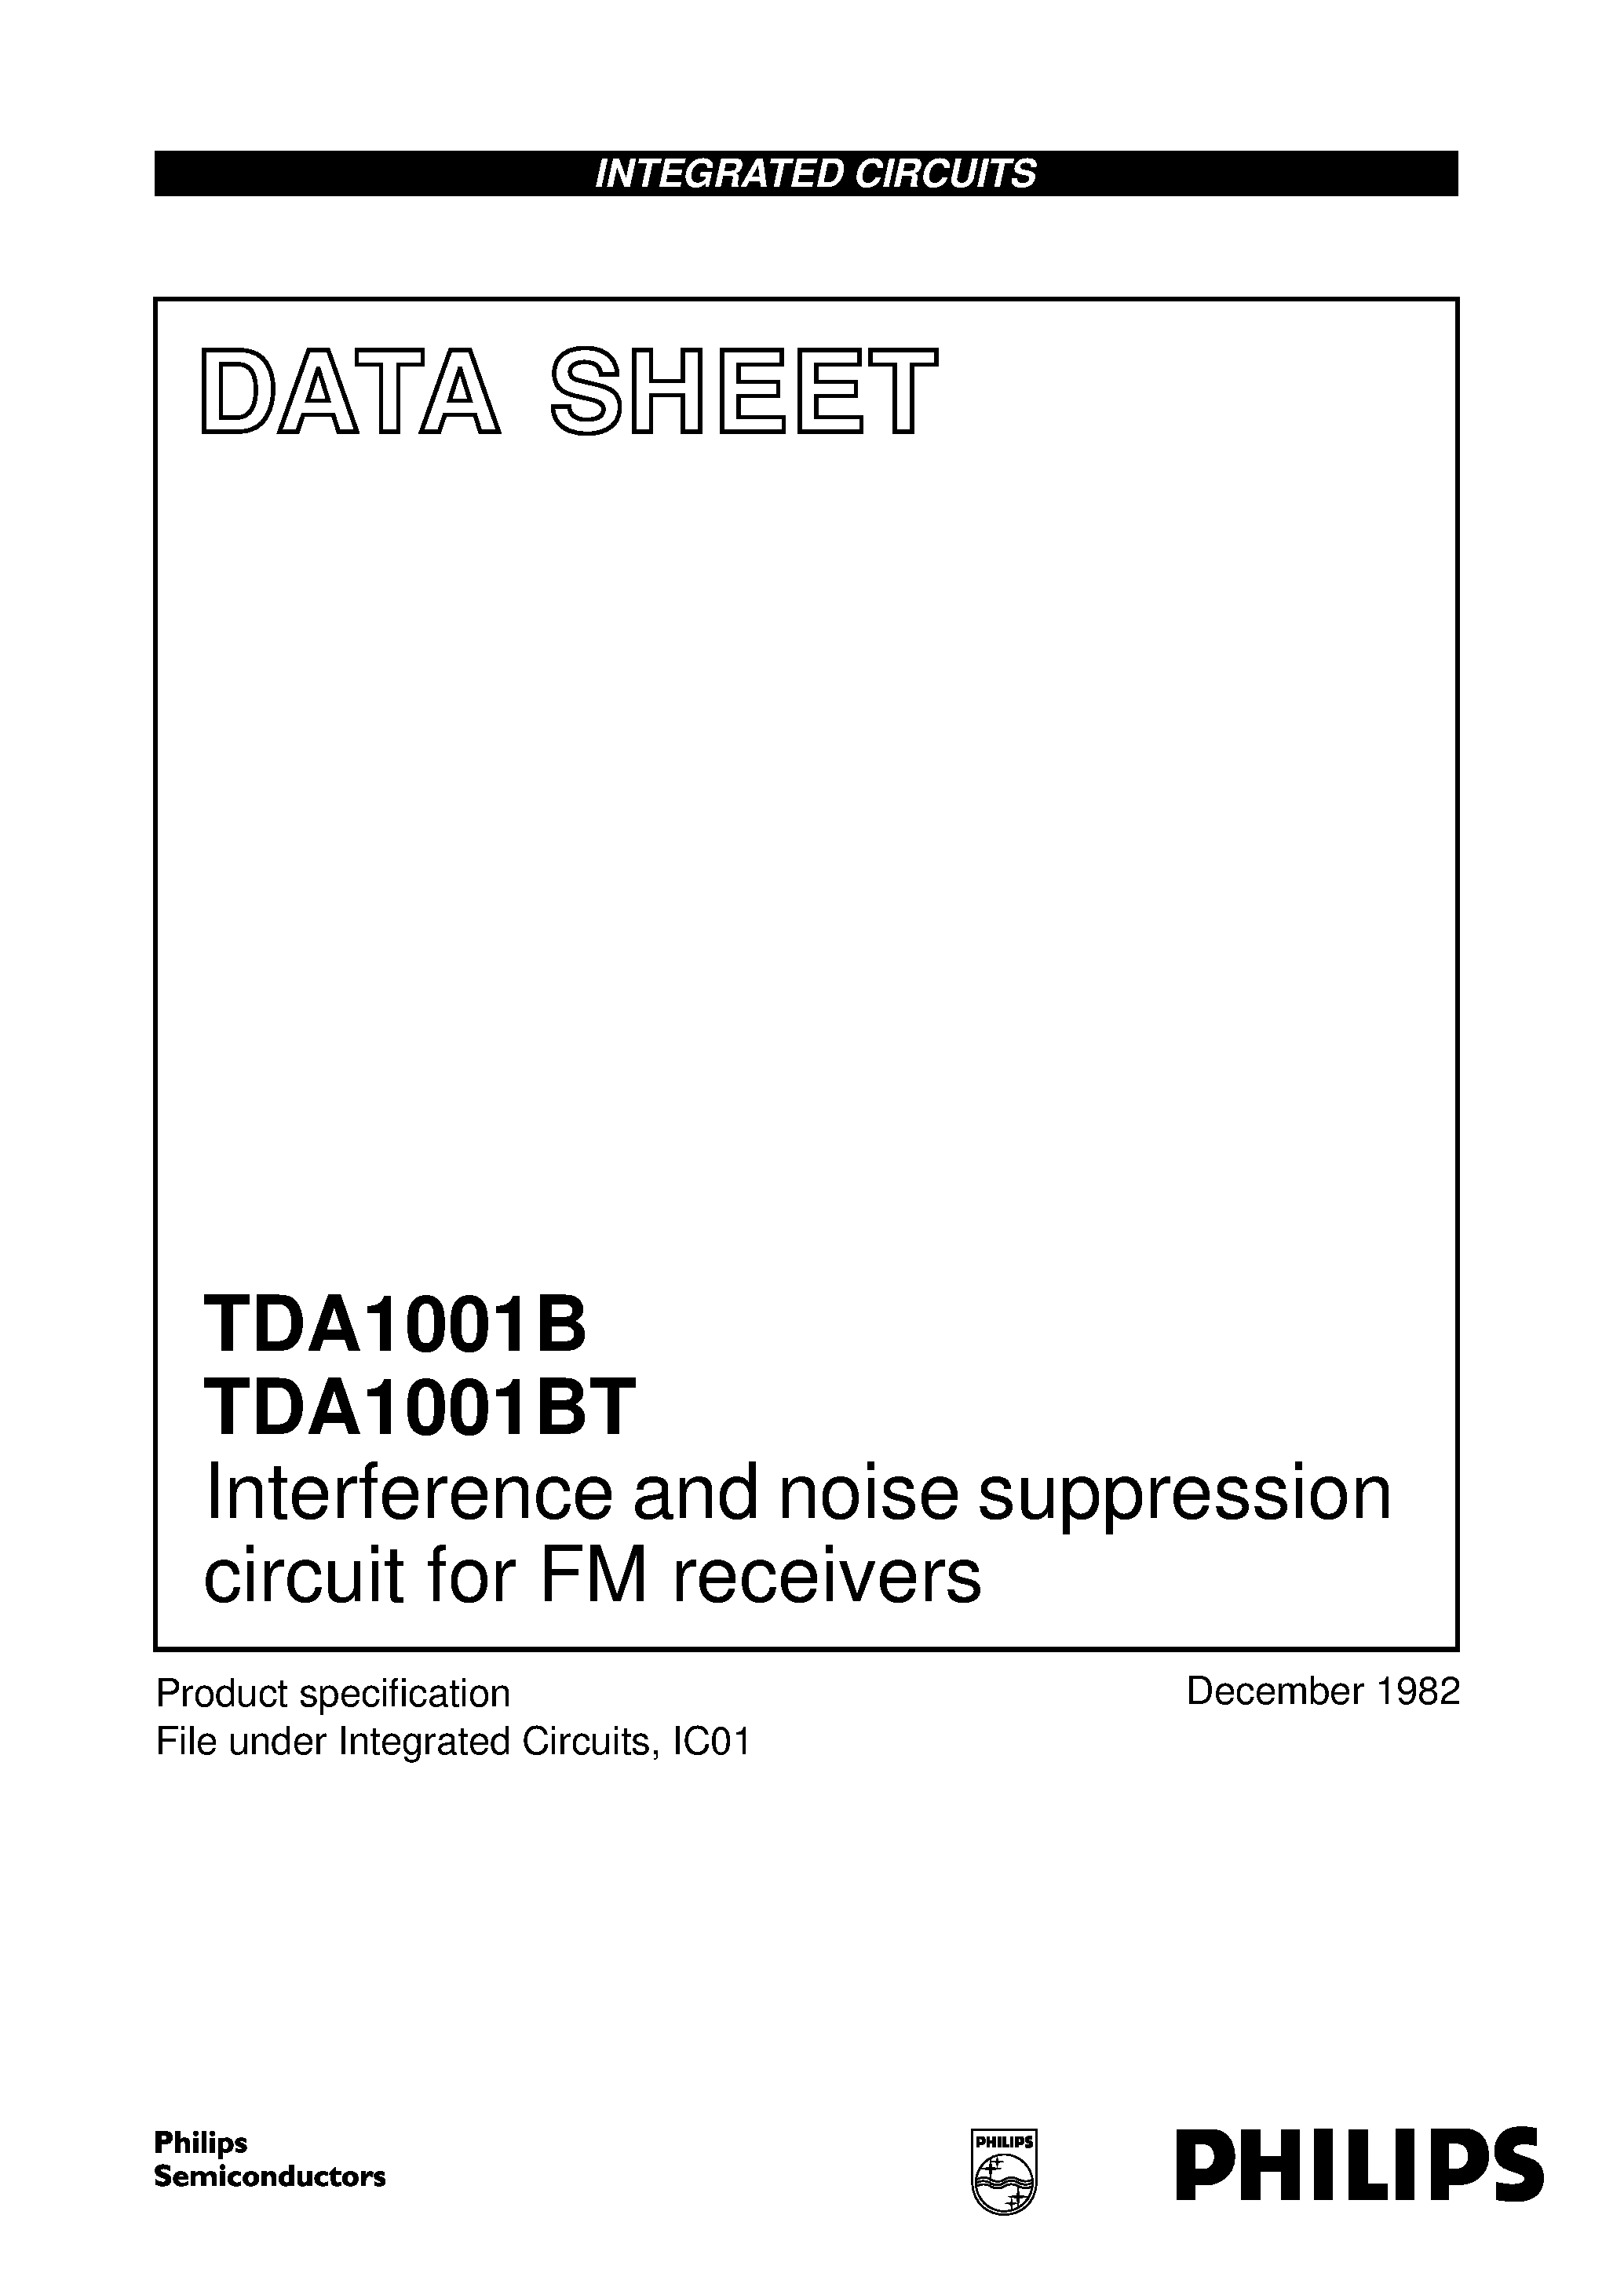 Даташит TDA1001 - Interference and noise suppression circuit for FM receivers страница 1